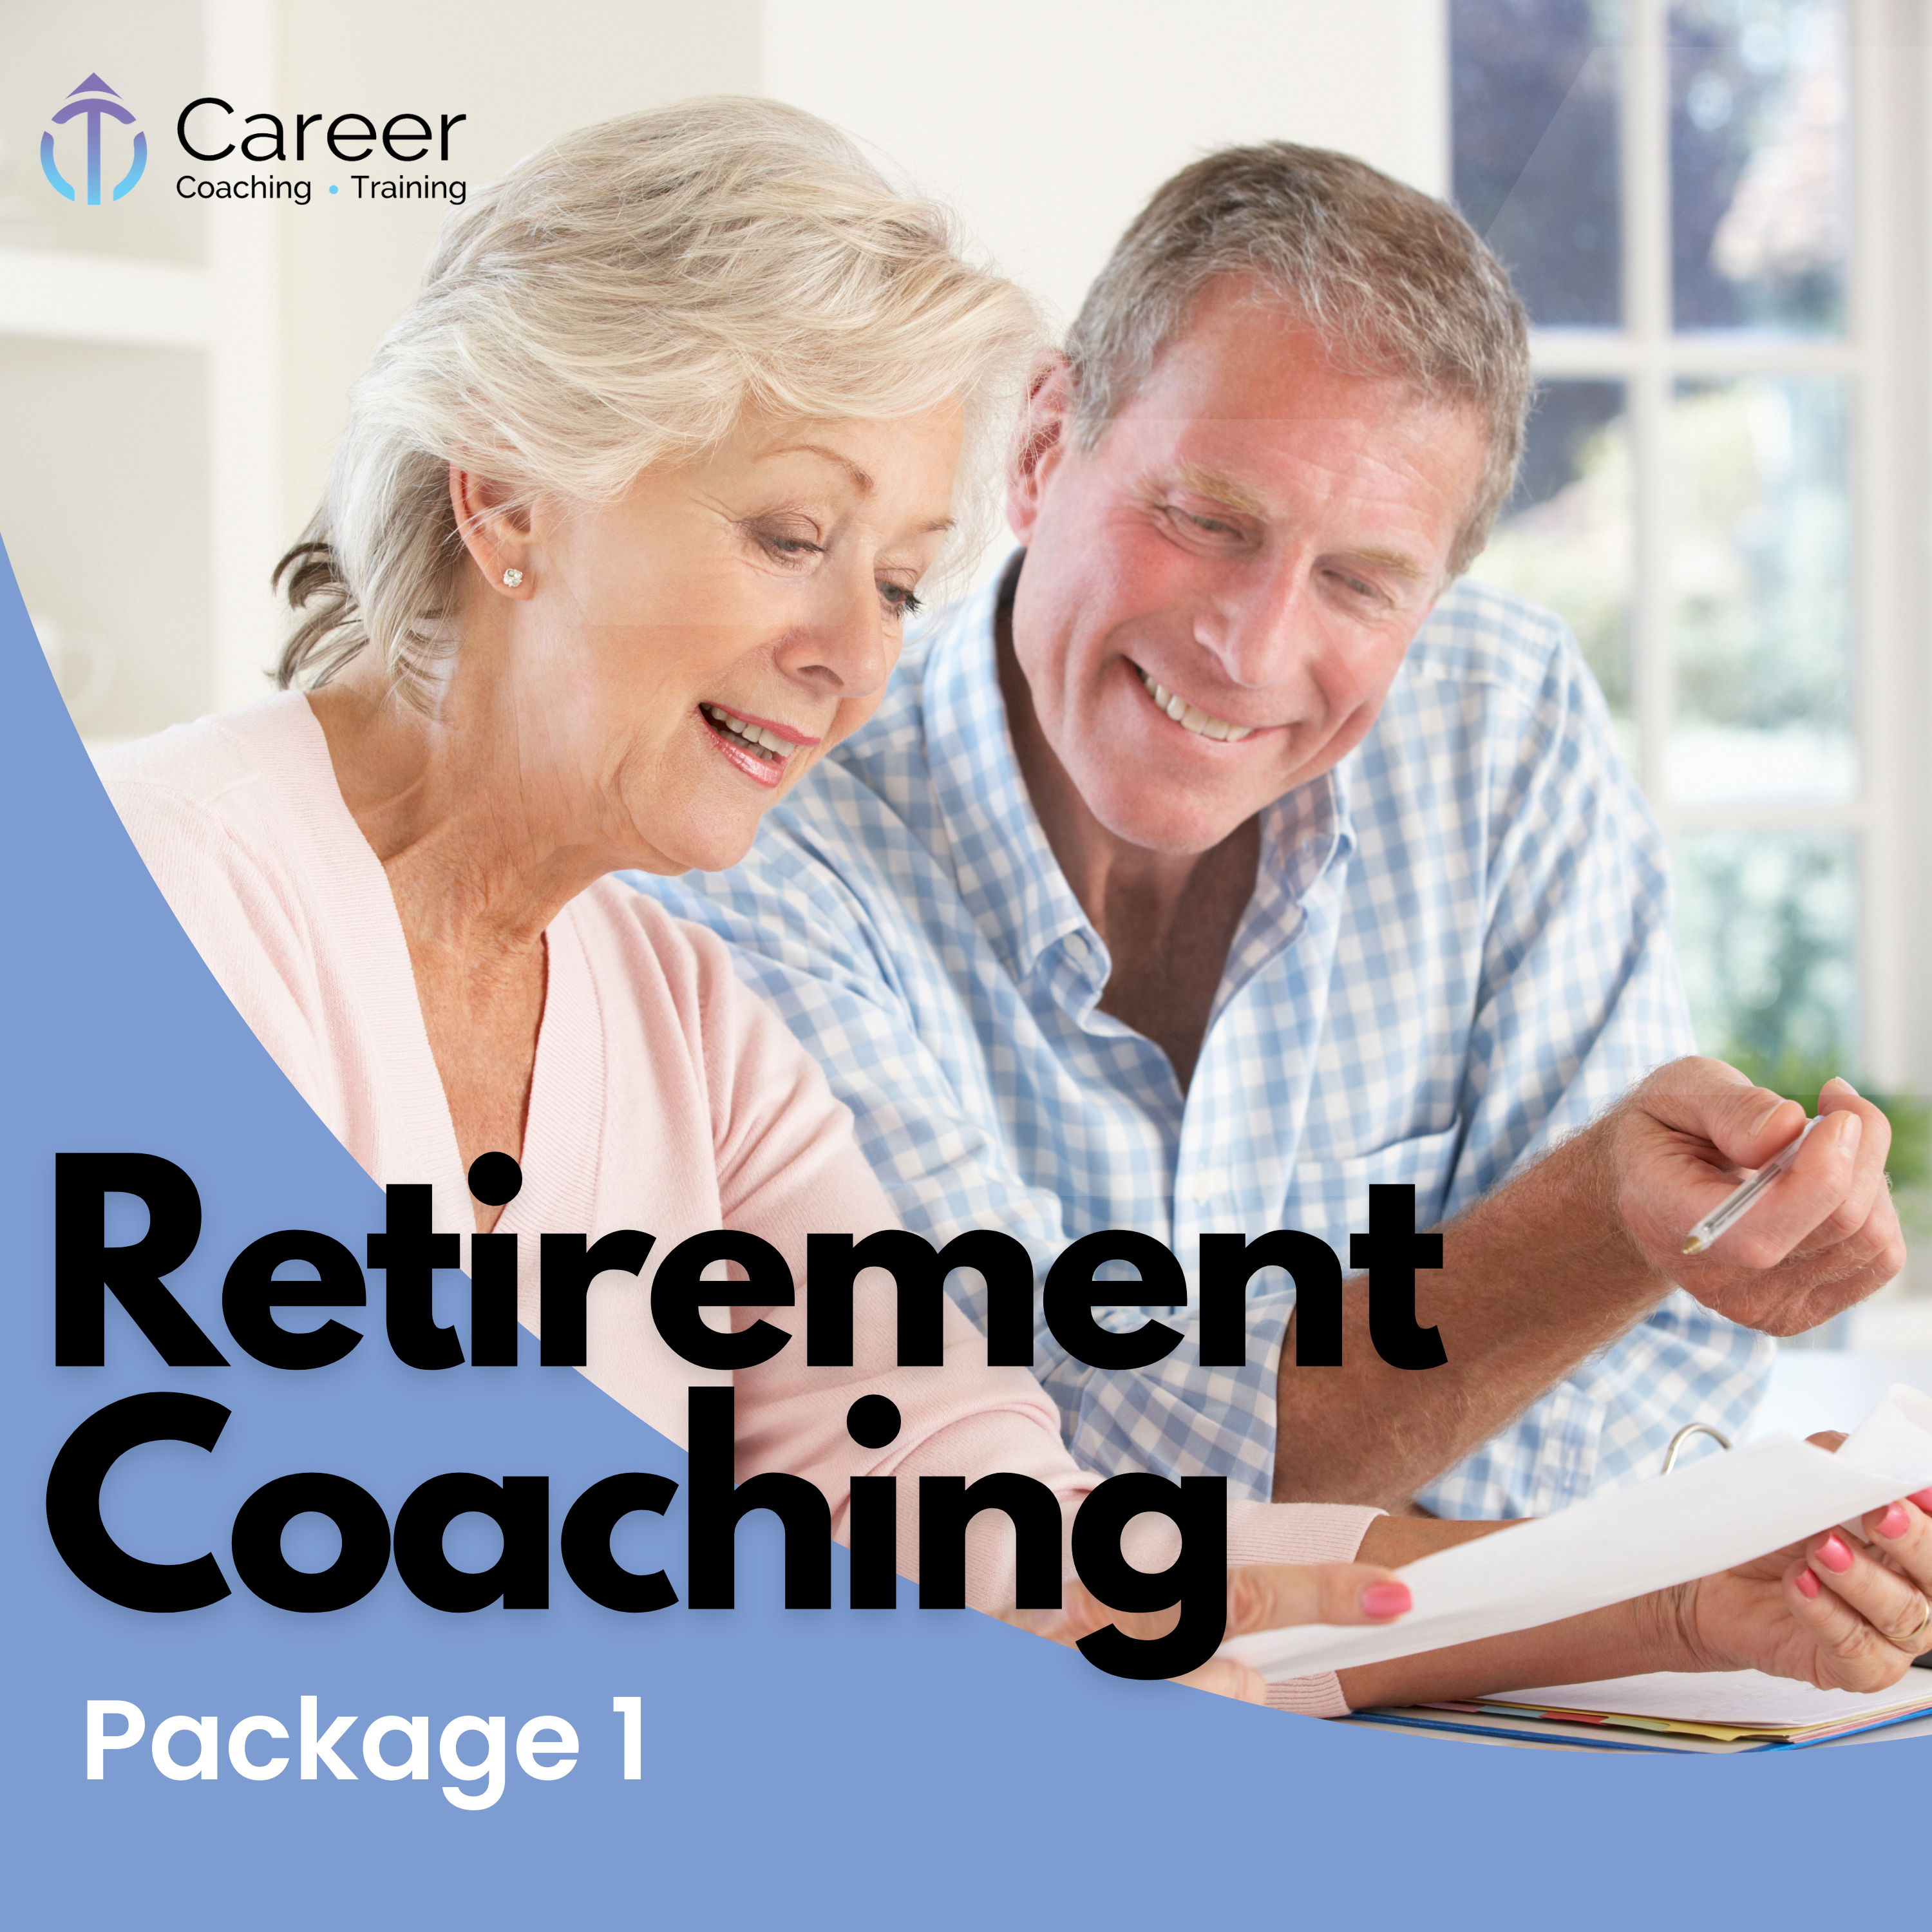 Retirement Coaching - Package 1